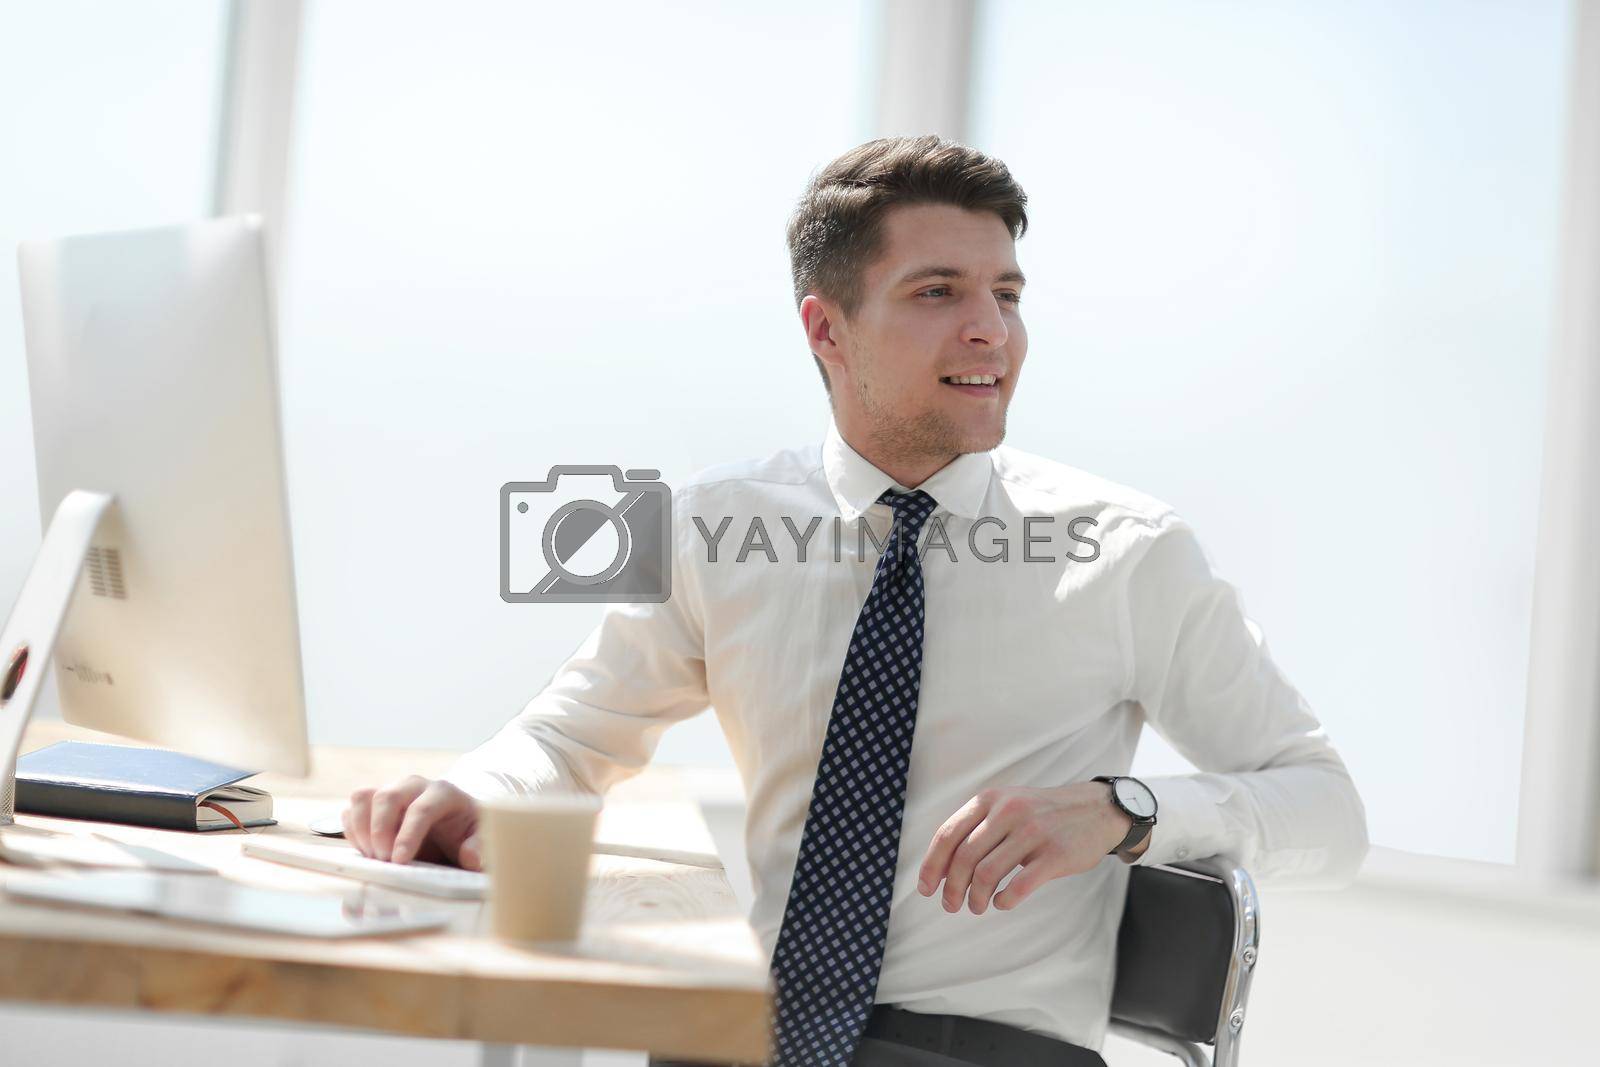 Royalty free image of young employee in the workplace in the office by asdf